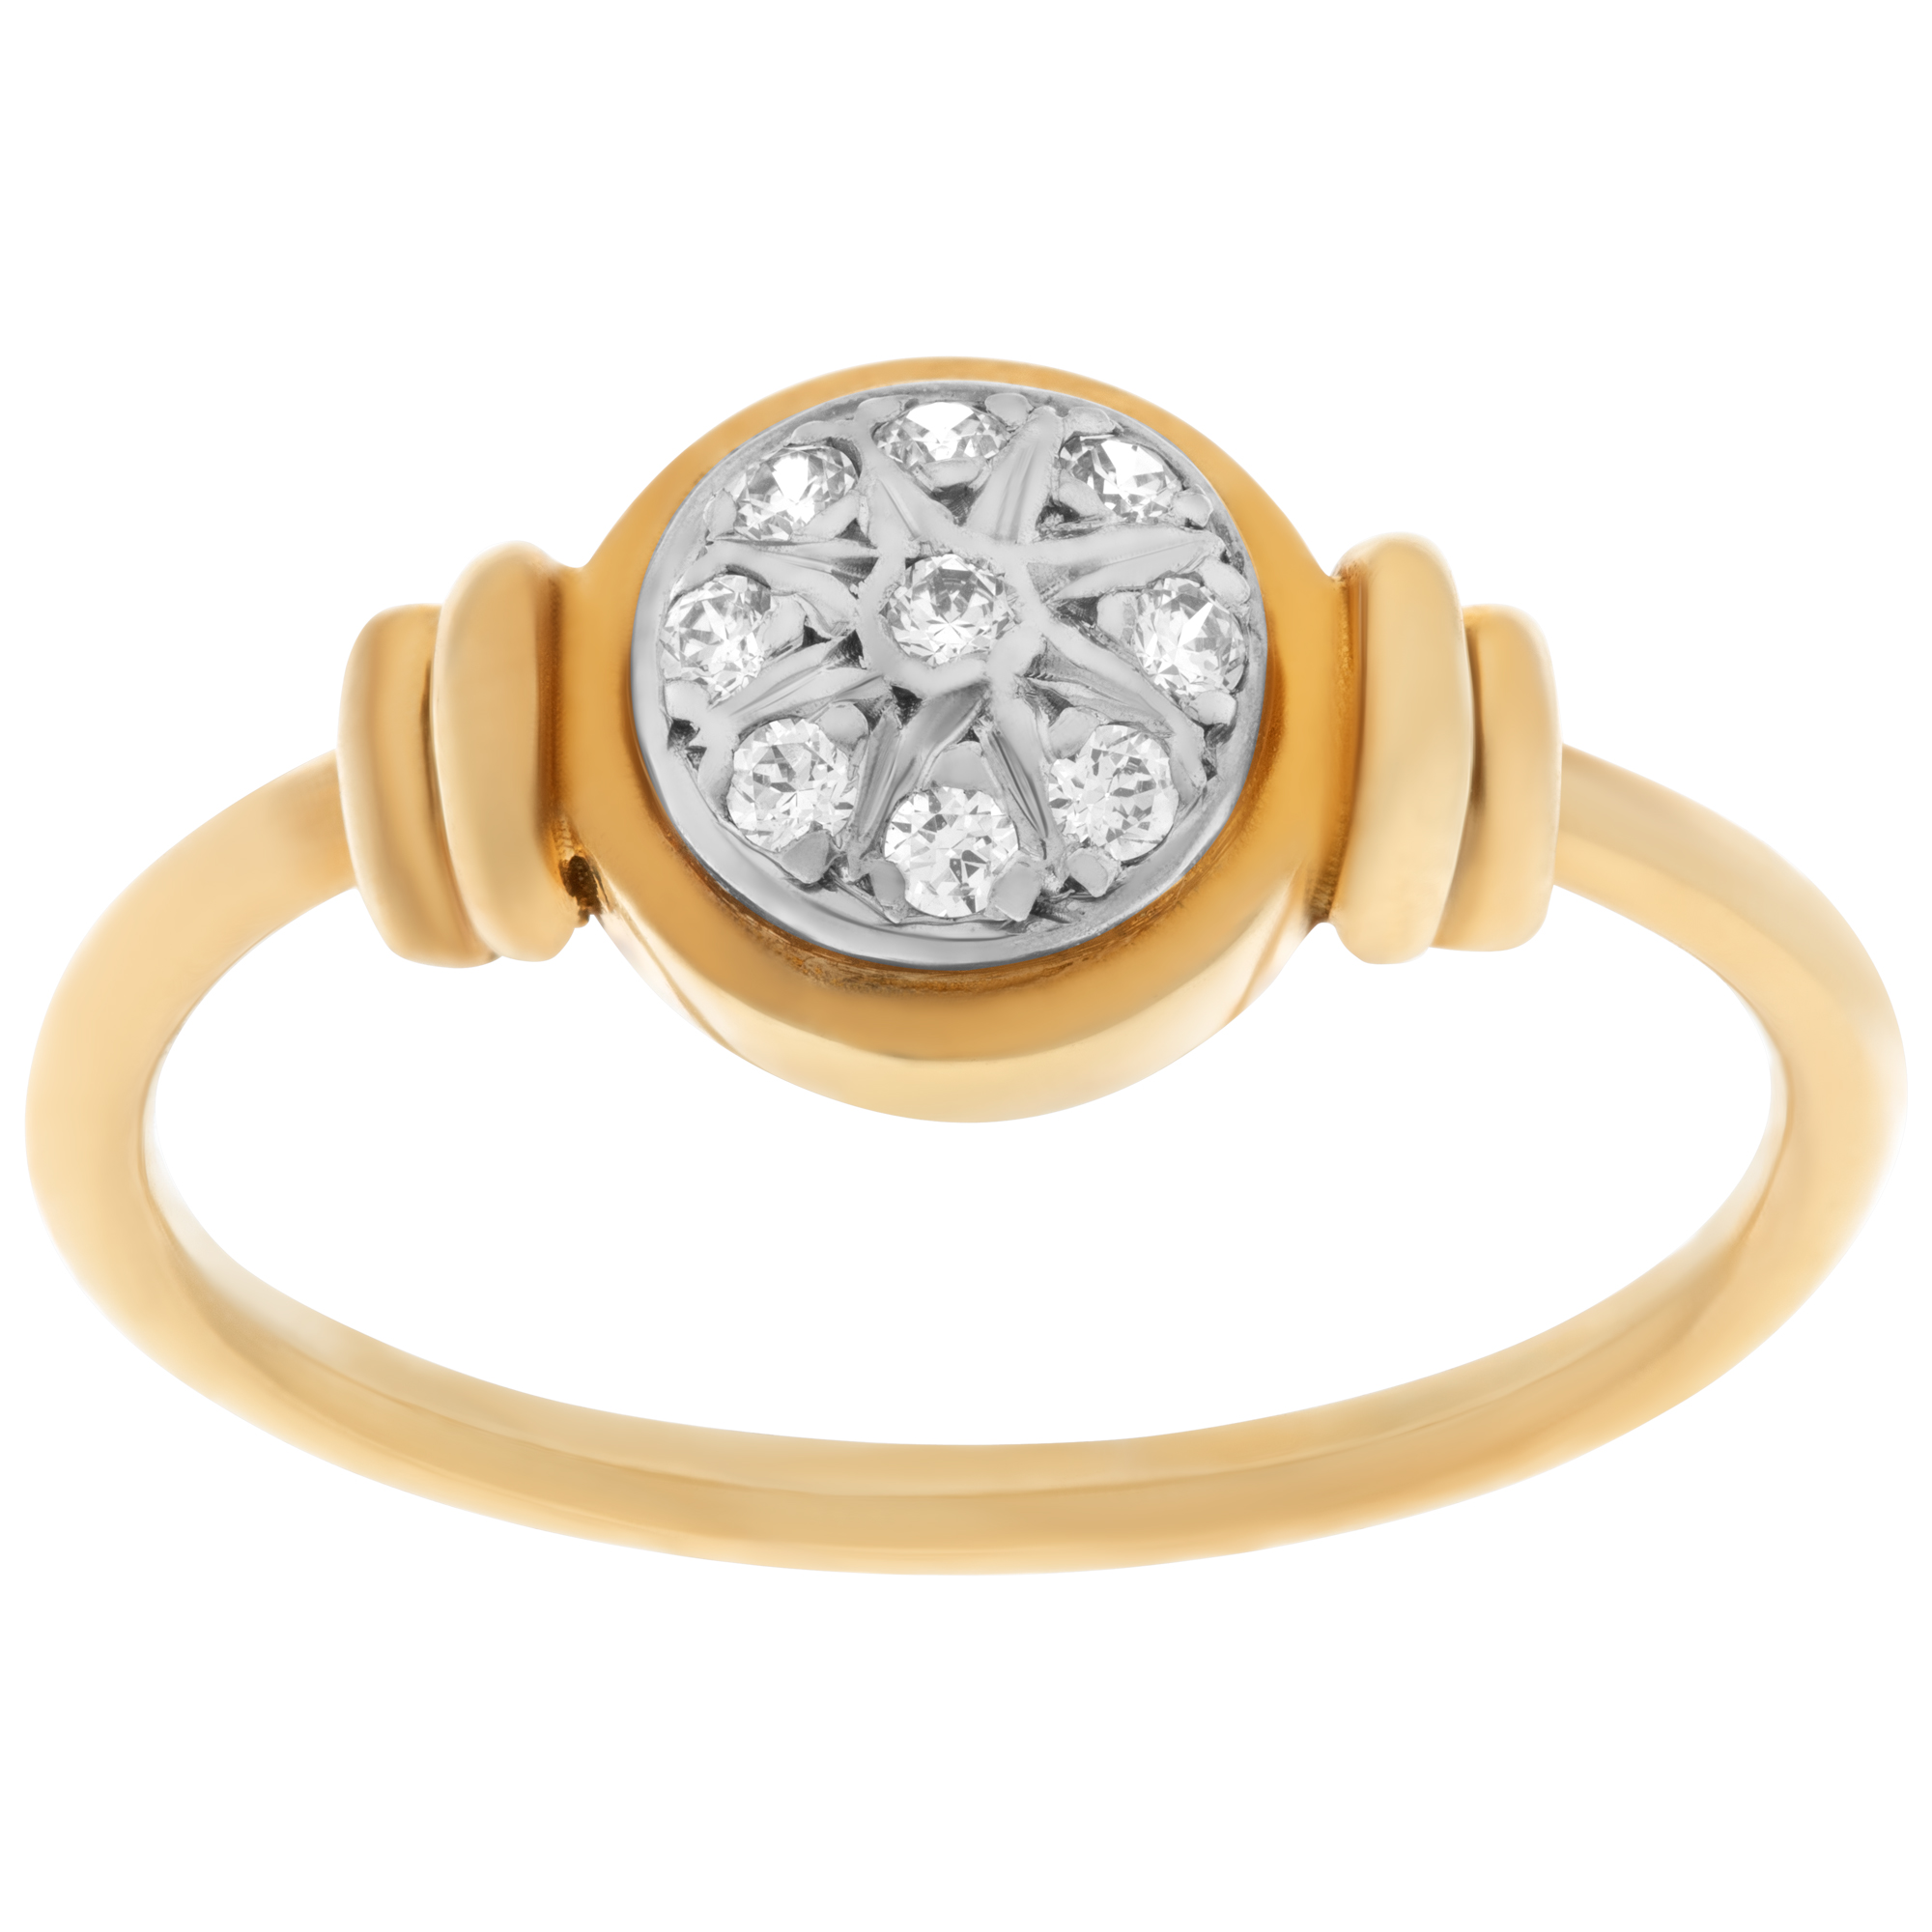 Charming vintage ring with approx 0.50 carat round brilliant diamond cut, set in 14K gold image 1